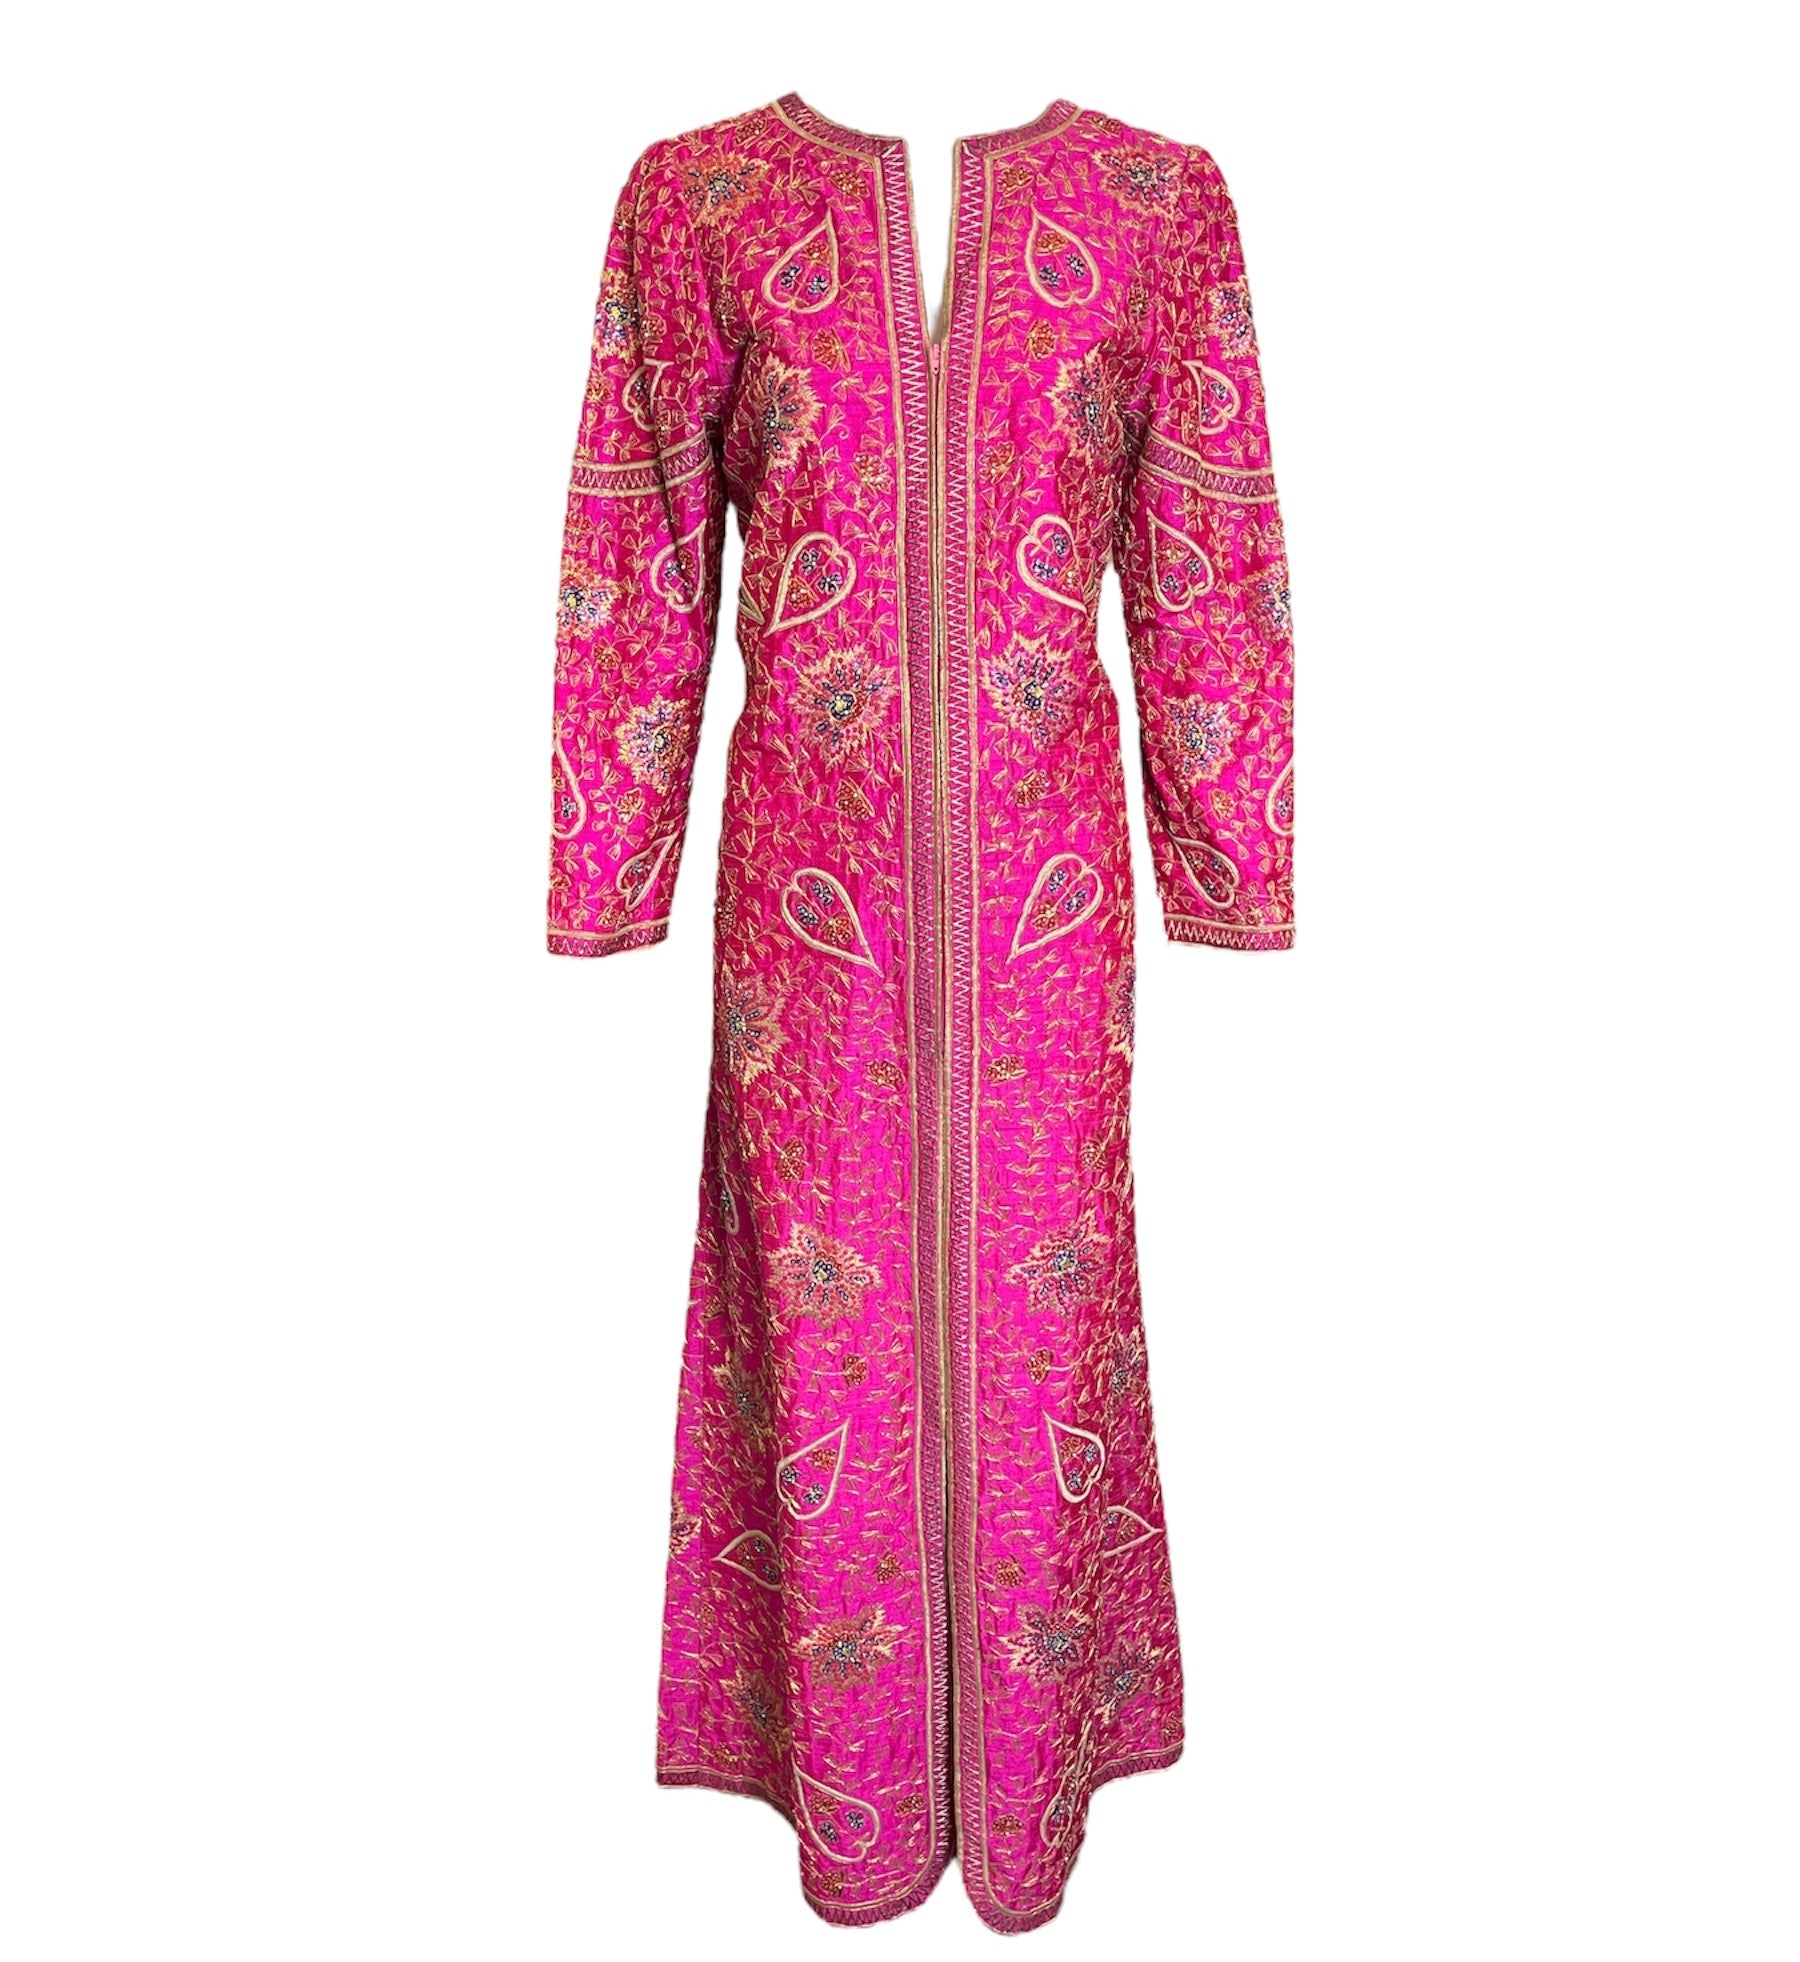 1960s Pink Paisely Beaded Embroidered Kaftan Dress FRONT PHOTO 1 OF 5